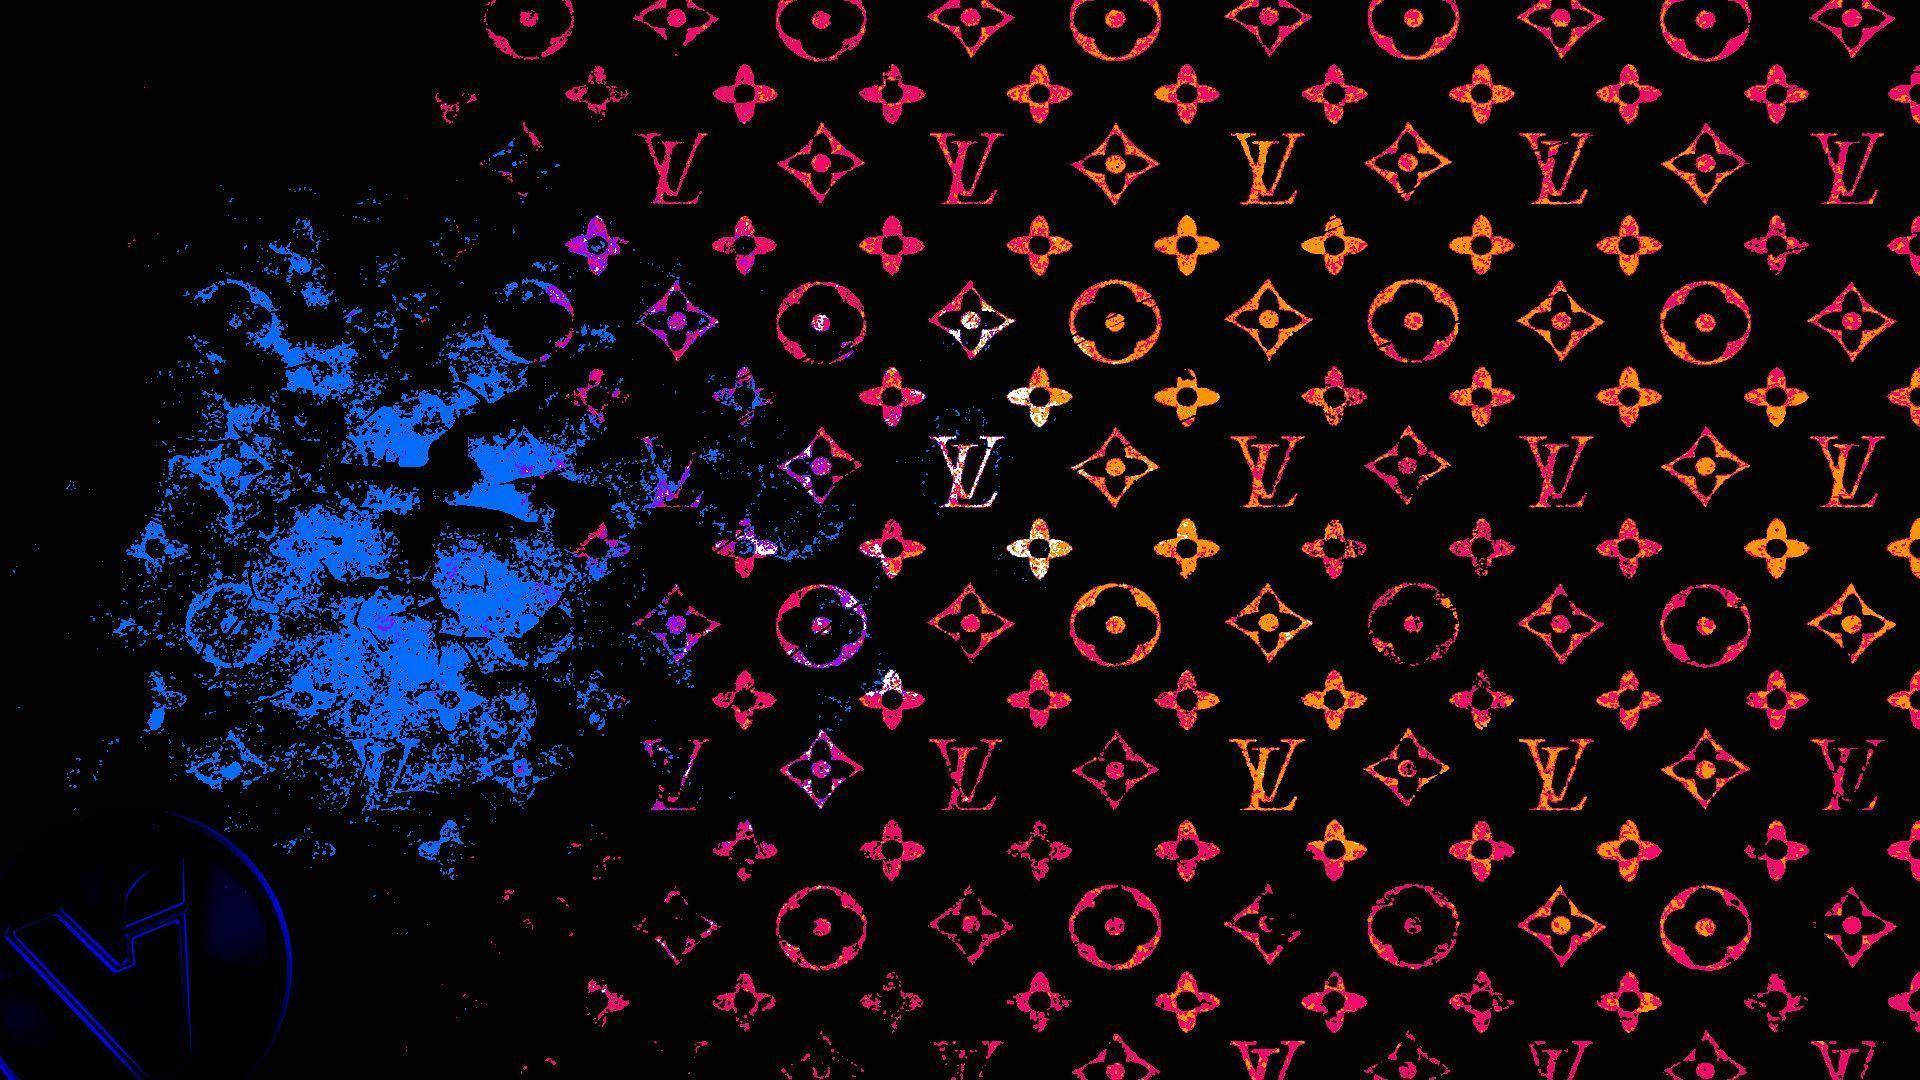 The iconic Louis Vuitton logo, illuminated in a rainbow of vibrant neon colors. Wallpaper